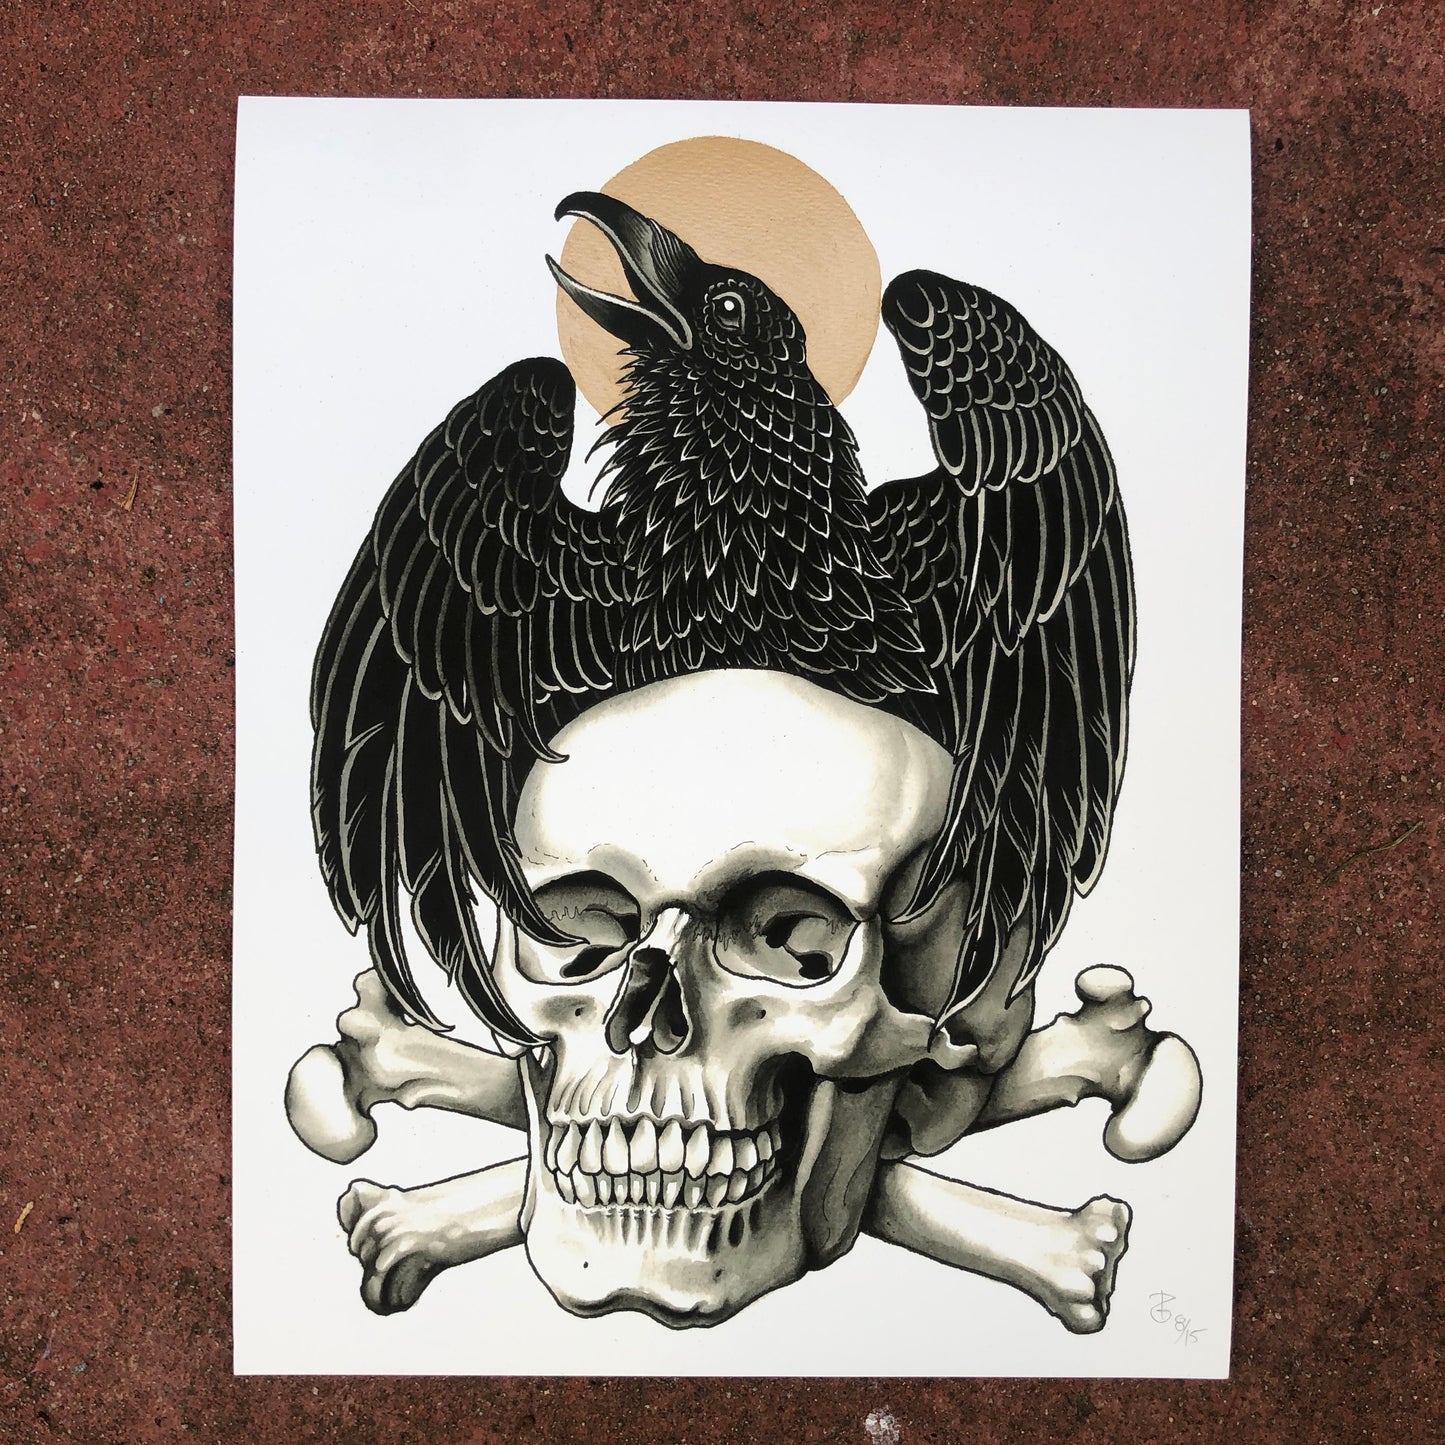 Phil Geck "Crow and Skull" Print (2021)